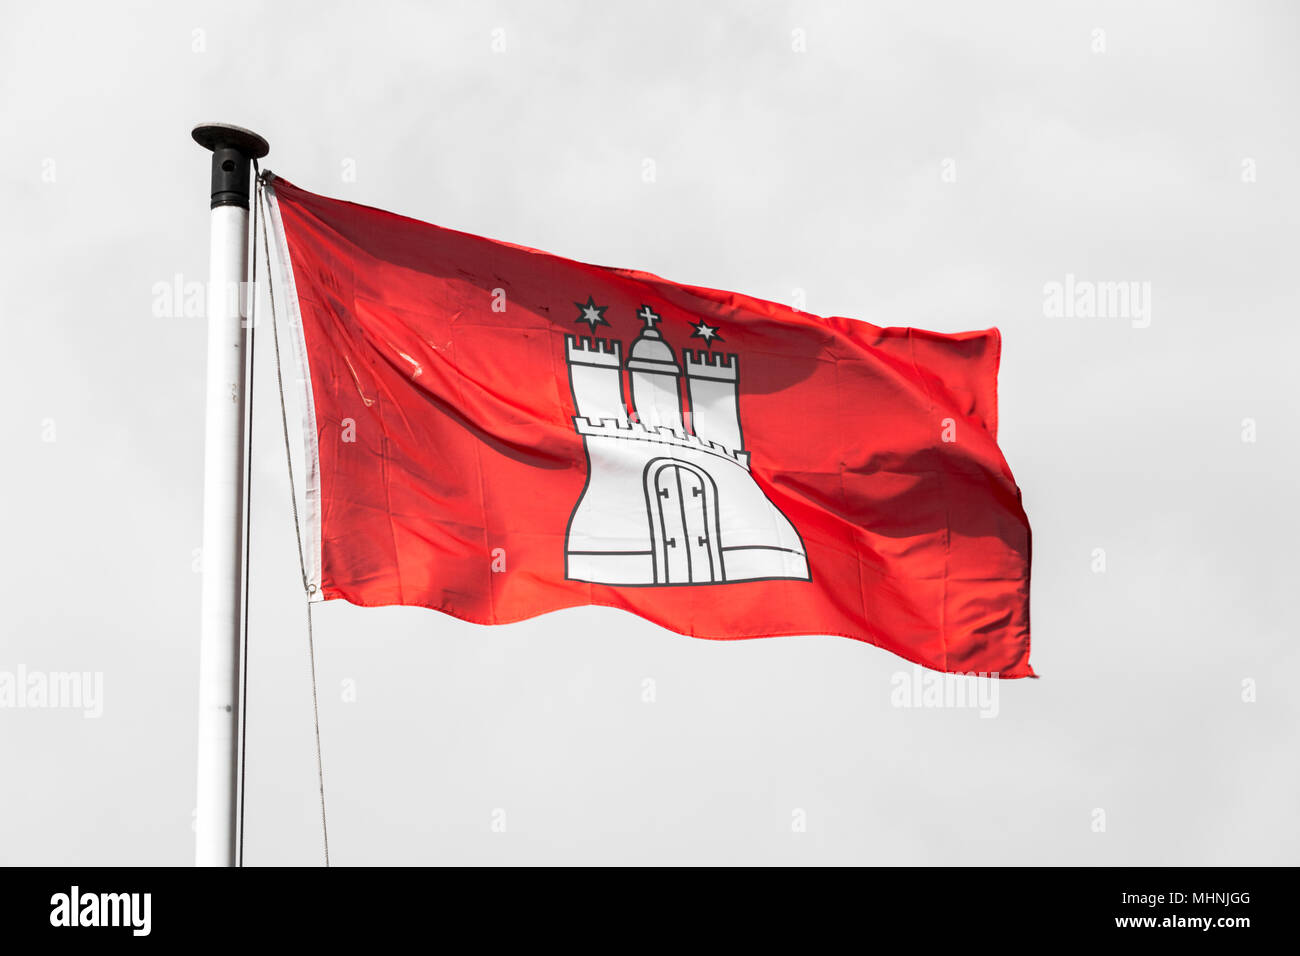 Civil and state flag of the Free and Hanseatic City of Hamburg, with the coat of arms showing a white castle with three towers on a red background Stock Photo